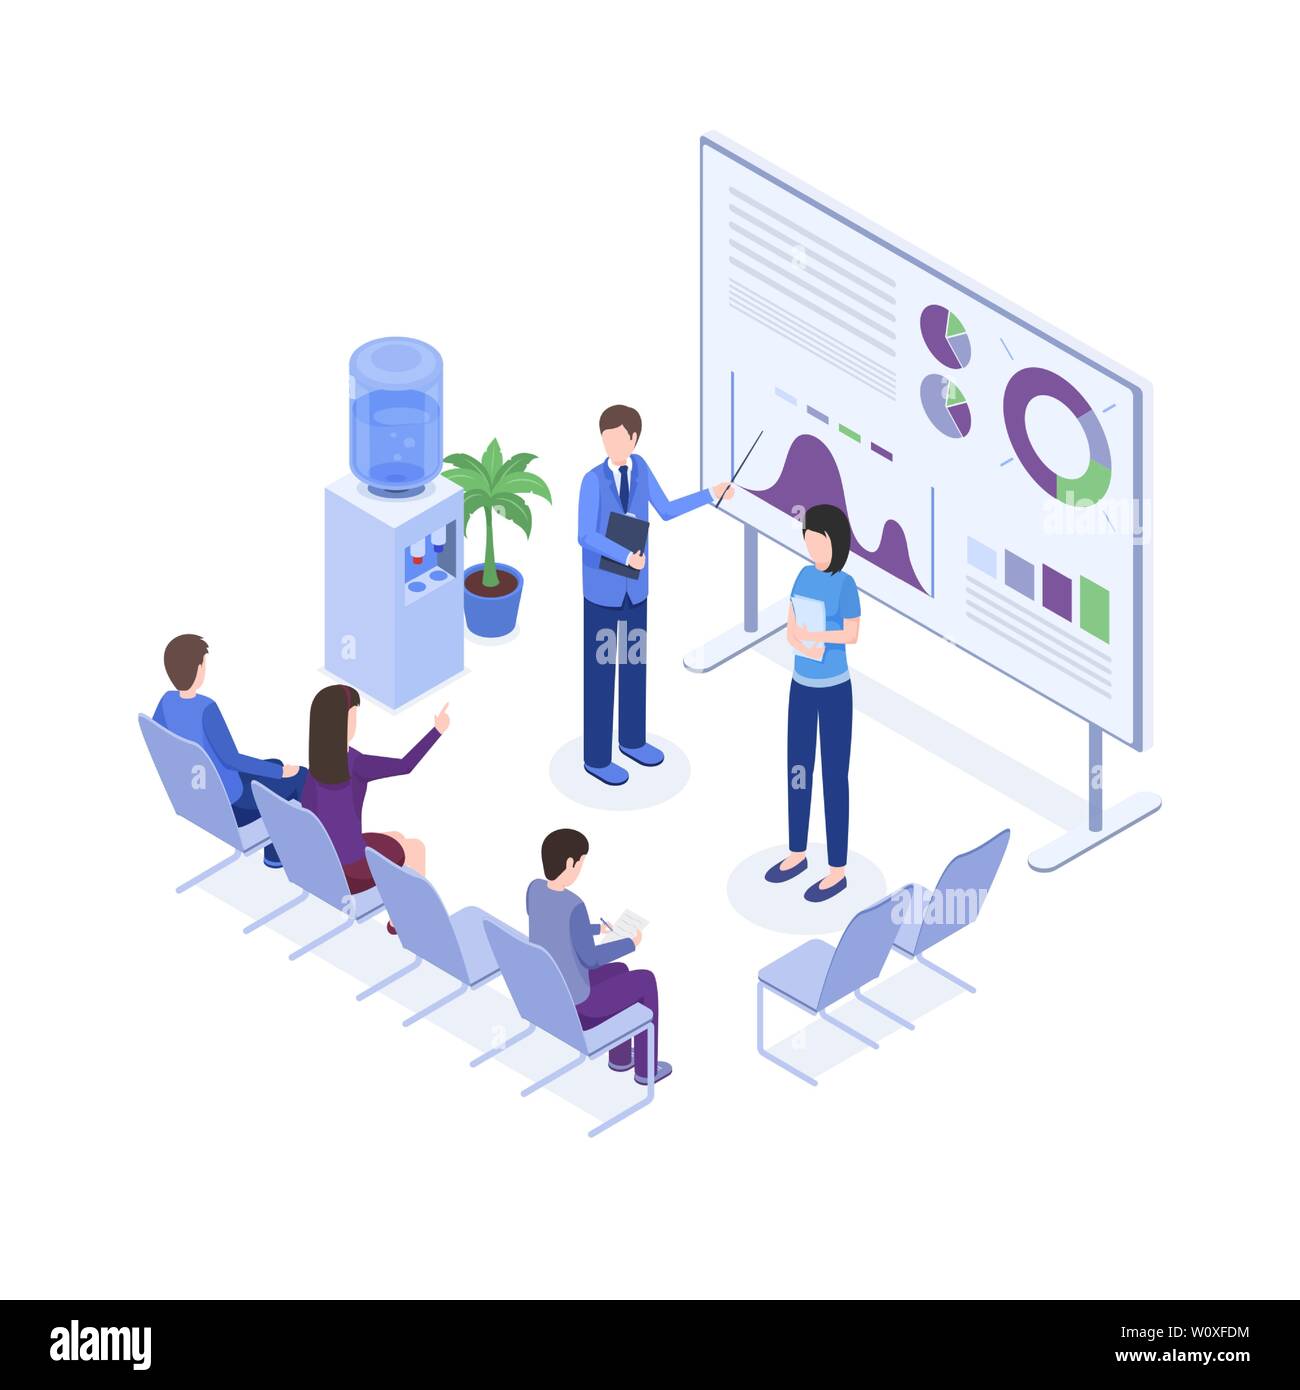 Project presentation vector isometric illustration. Speaker at business convention, workers 3d cartoon characters. Corporate trainings, seminar, business school, employer explaining diagrams on board Stock Vector